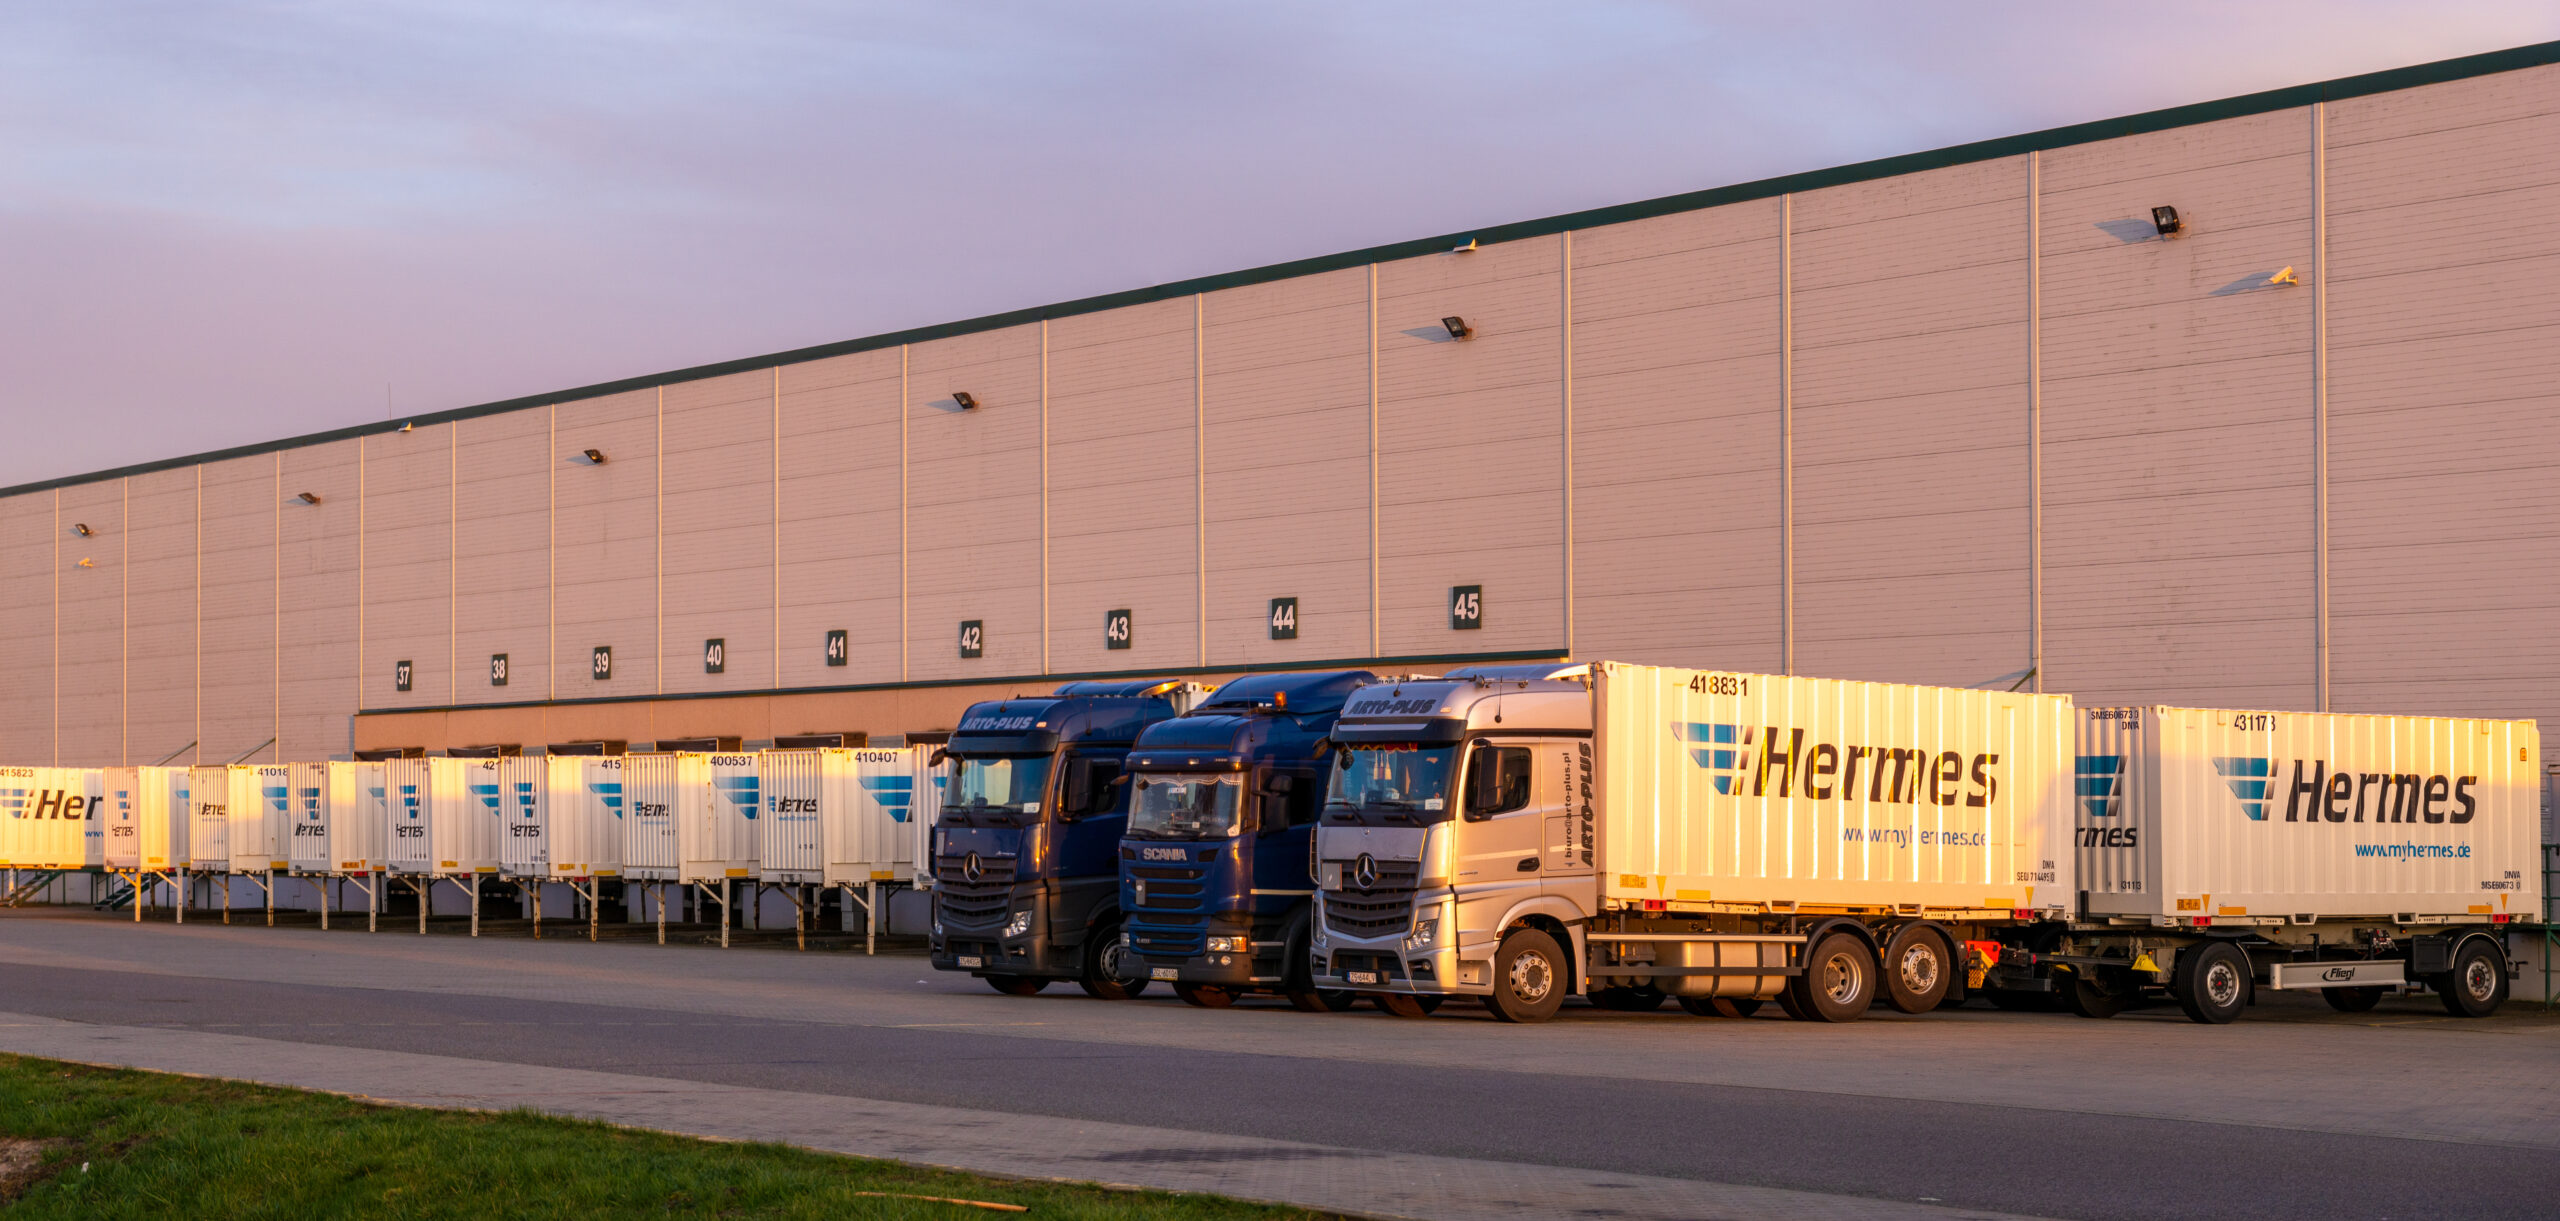 Scania and Mercedes trucks carrying containers with the Hermes logo - BorderGuru